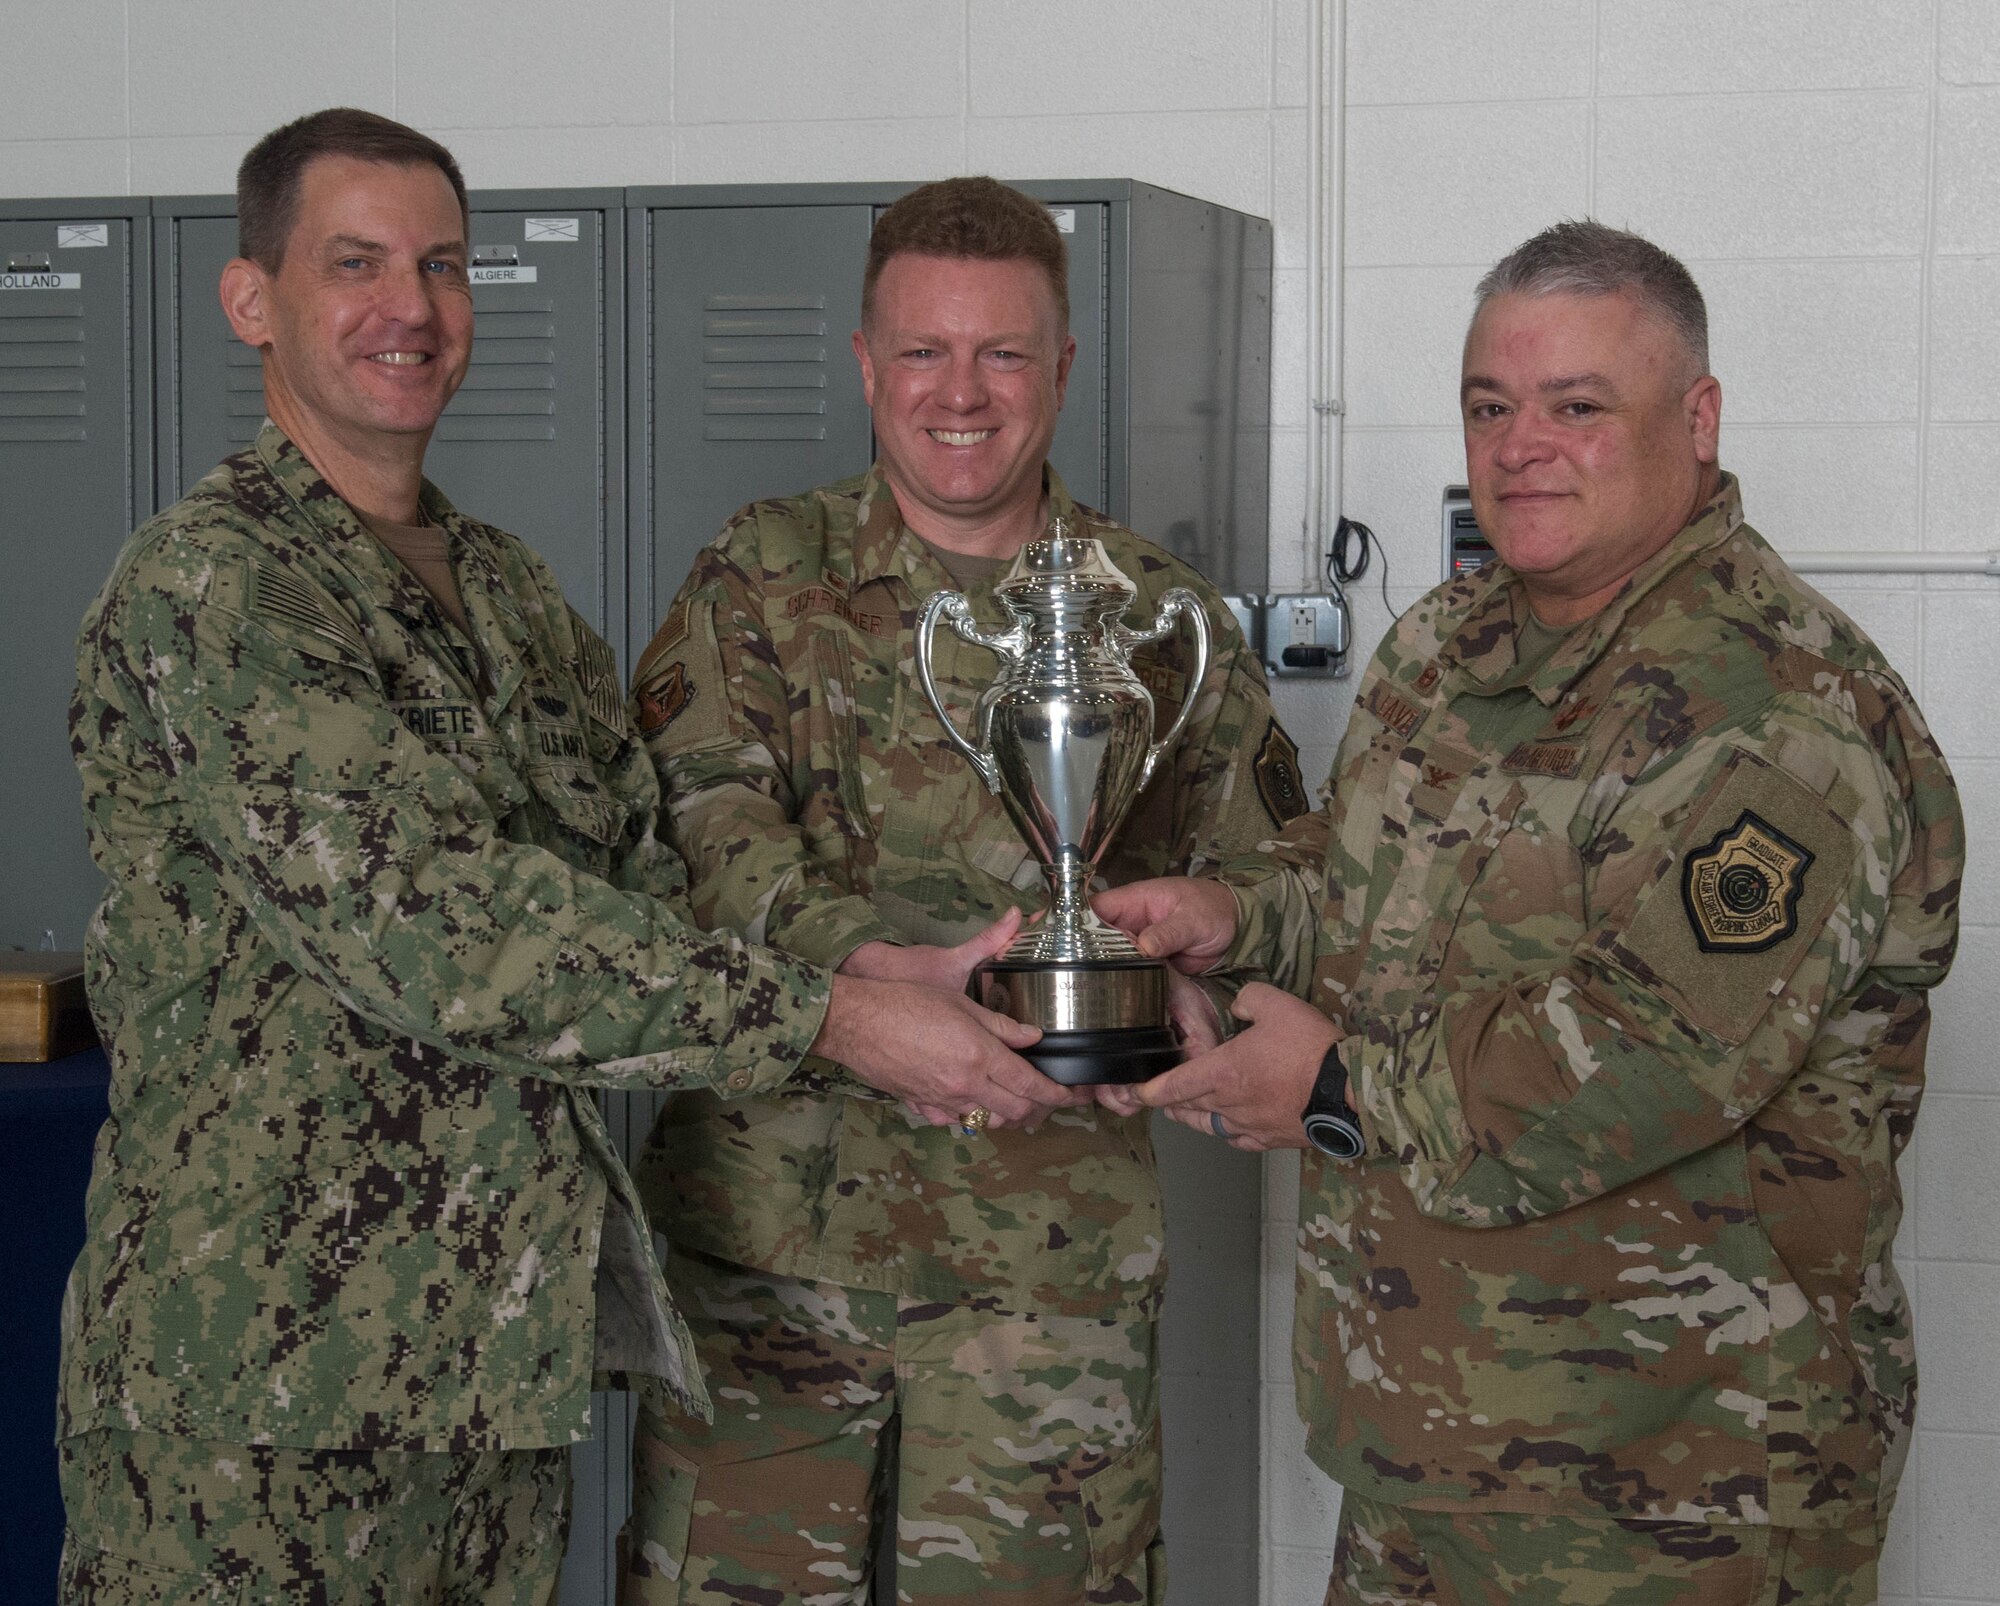 From left, U.S. Navy Vice Adm. Dave Kriete presents the Omaha Trophy to Col. Jeffrey Schreiner and Col. Kenneth Eaves on Aug. 27, 2019, at Whiteman Air Force Base, Missouri. The Omaha Trophy is awarded to units for excellence in strategic deterrence and support of global strike operations. The active-duty 509th Bomb Wing and Missouri Air National Guard’s 131st Bomb Wing jointly earned the Omaha Trophy because of their interoperability to execute one of the country’s most important national security missions: nuclear deterrence by utilizing the B-2 Spirit stealth bomber to deter adversaries and assure our allies. (U.S. Air Force Photo by Airman 1st Class Thomas Johns)